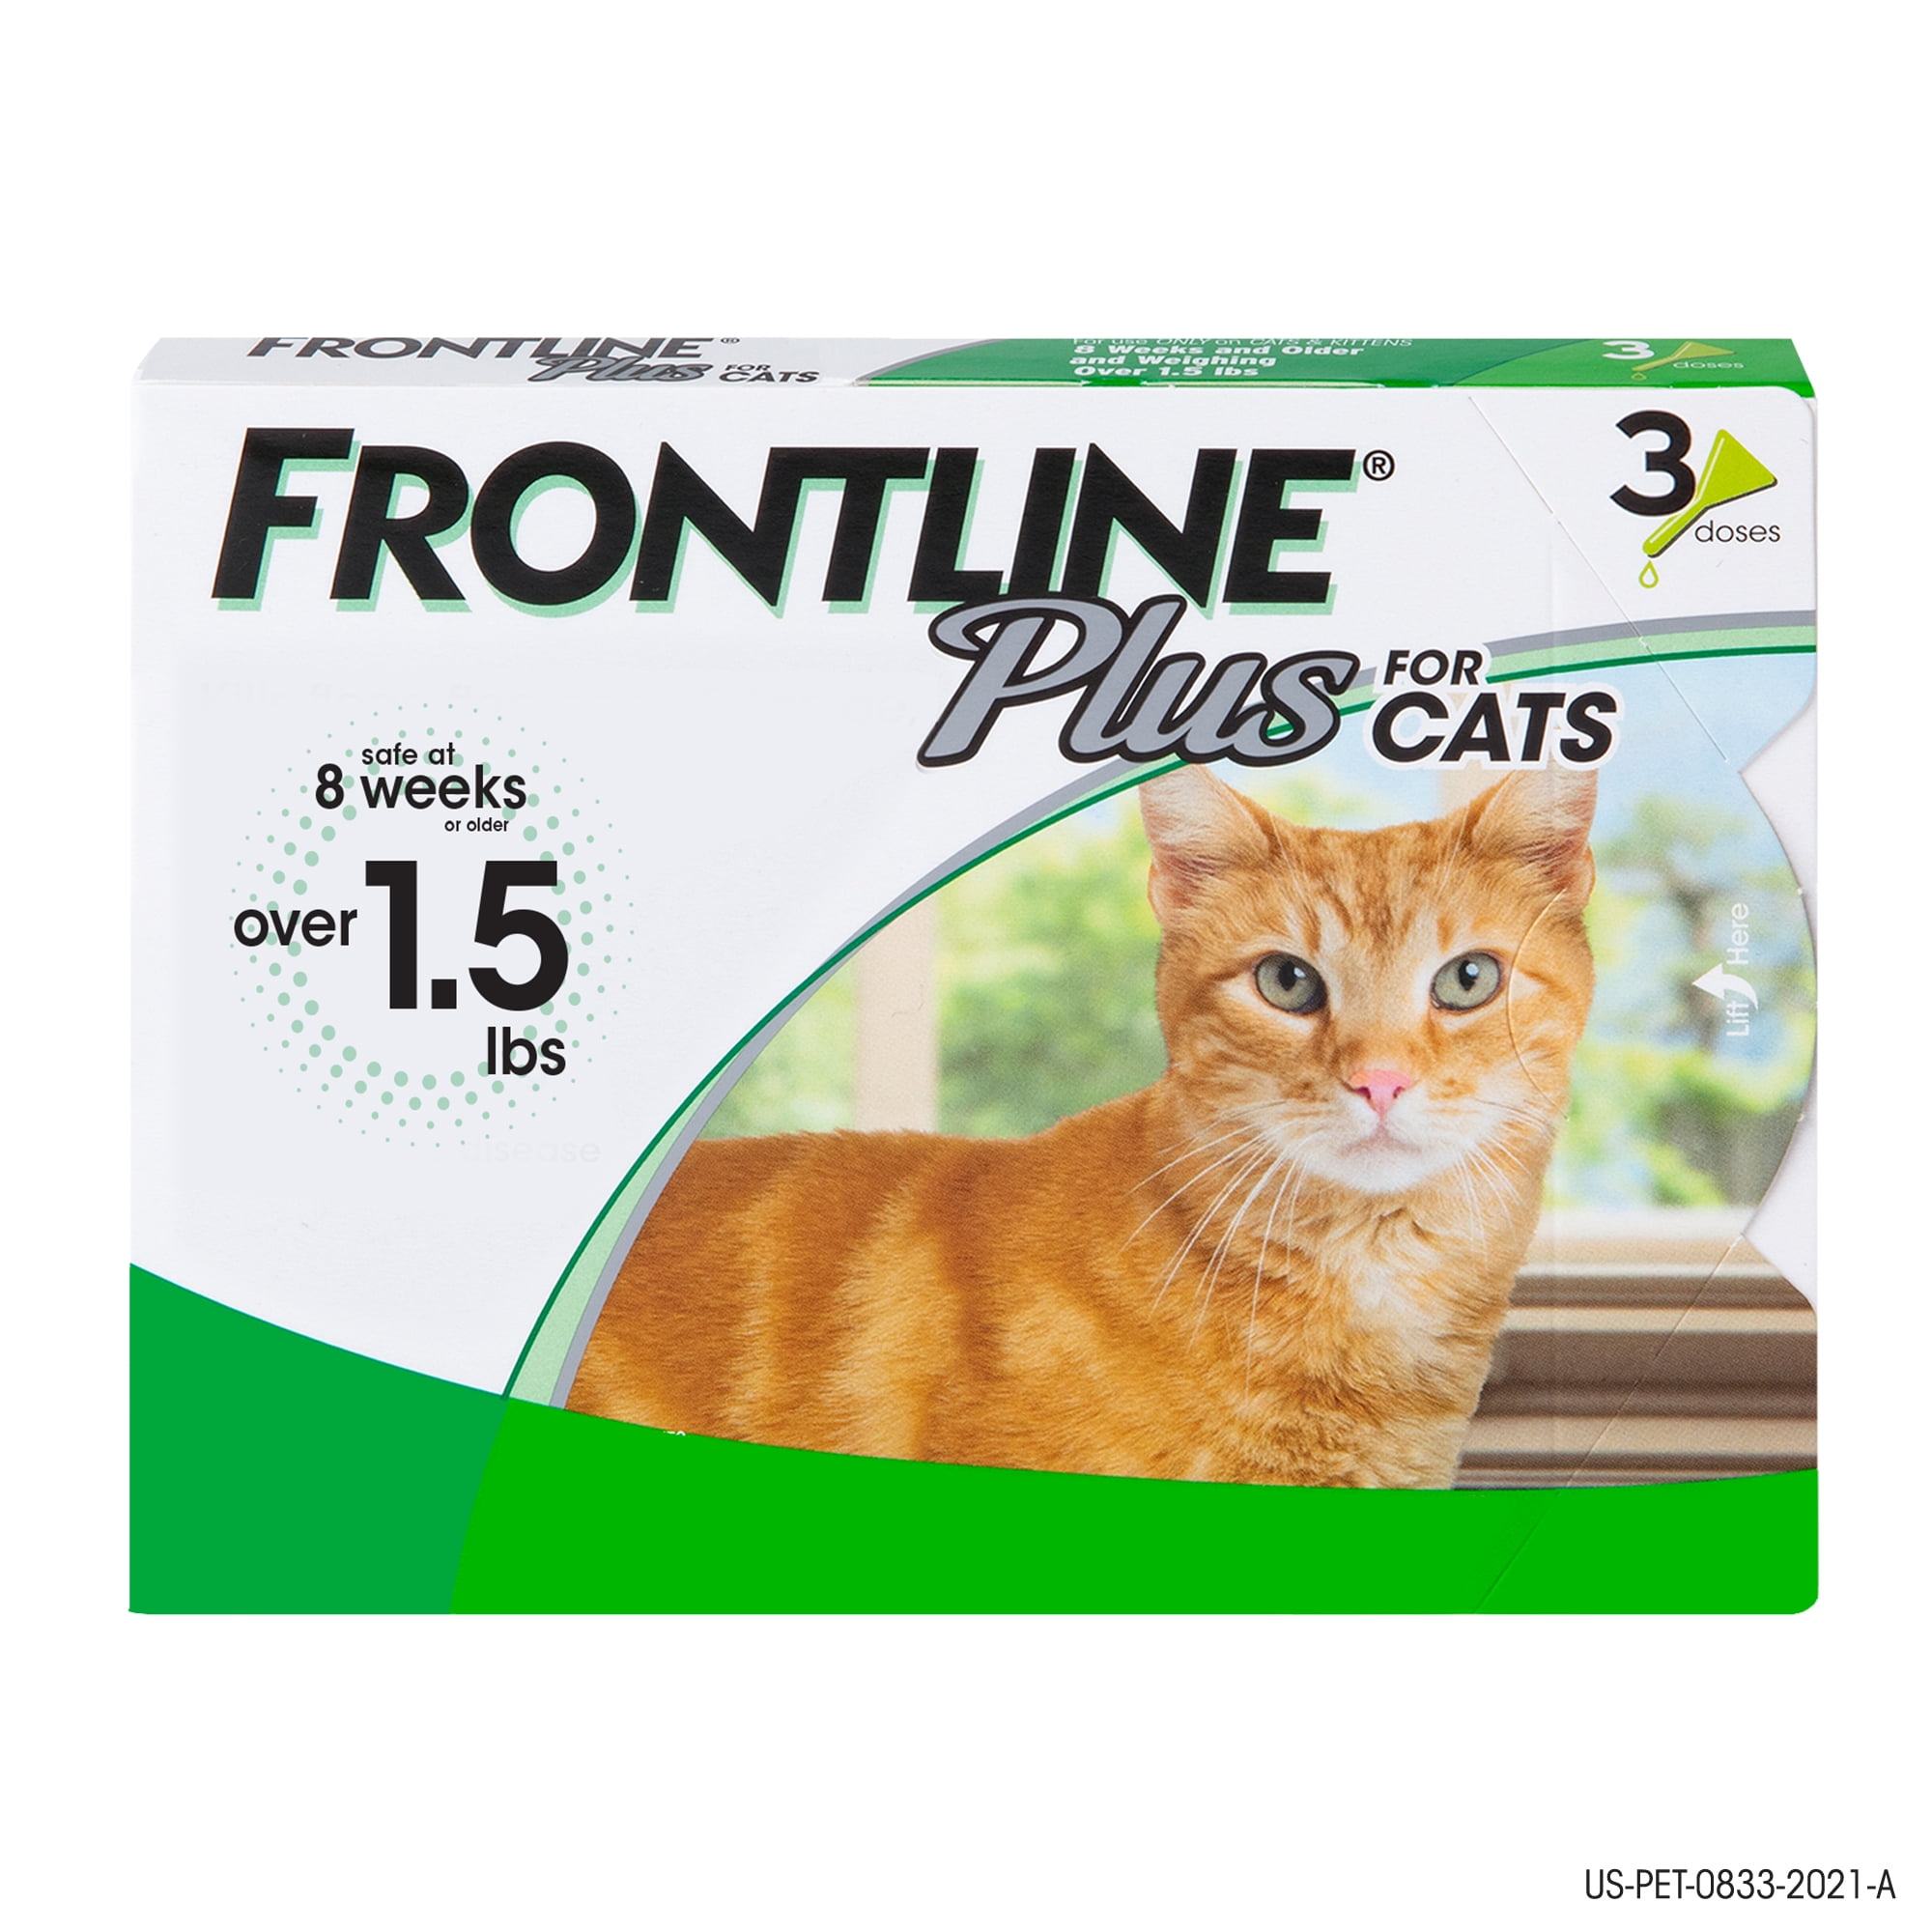 FRONTLINE® Plus For Cats and Kittens Flea and Tick Treatment, 3 CT